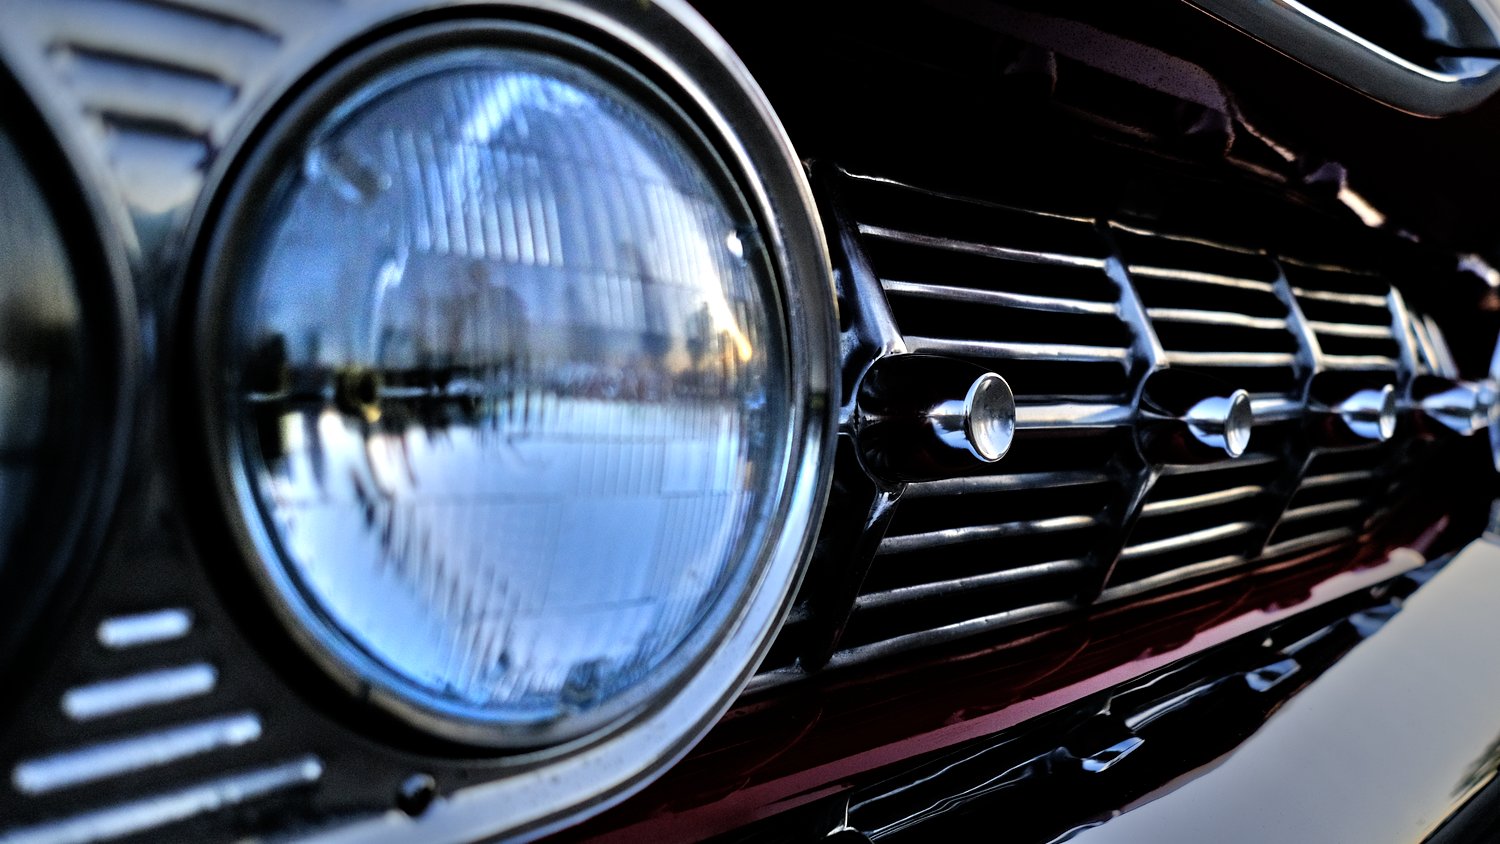 Headlight and chrome grille detail on Chevrolet Impala.